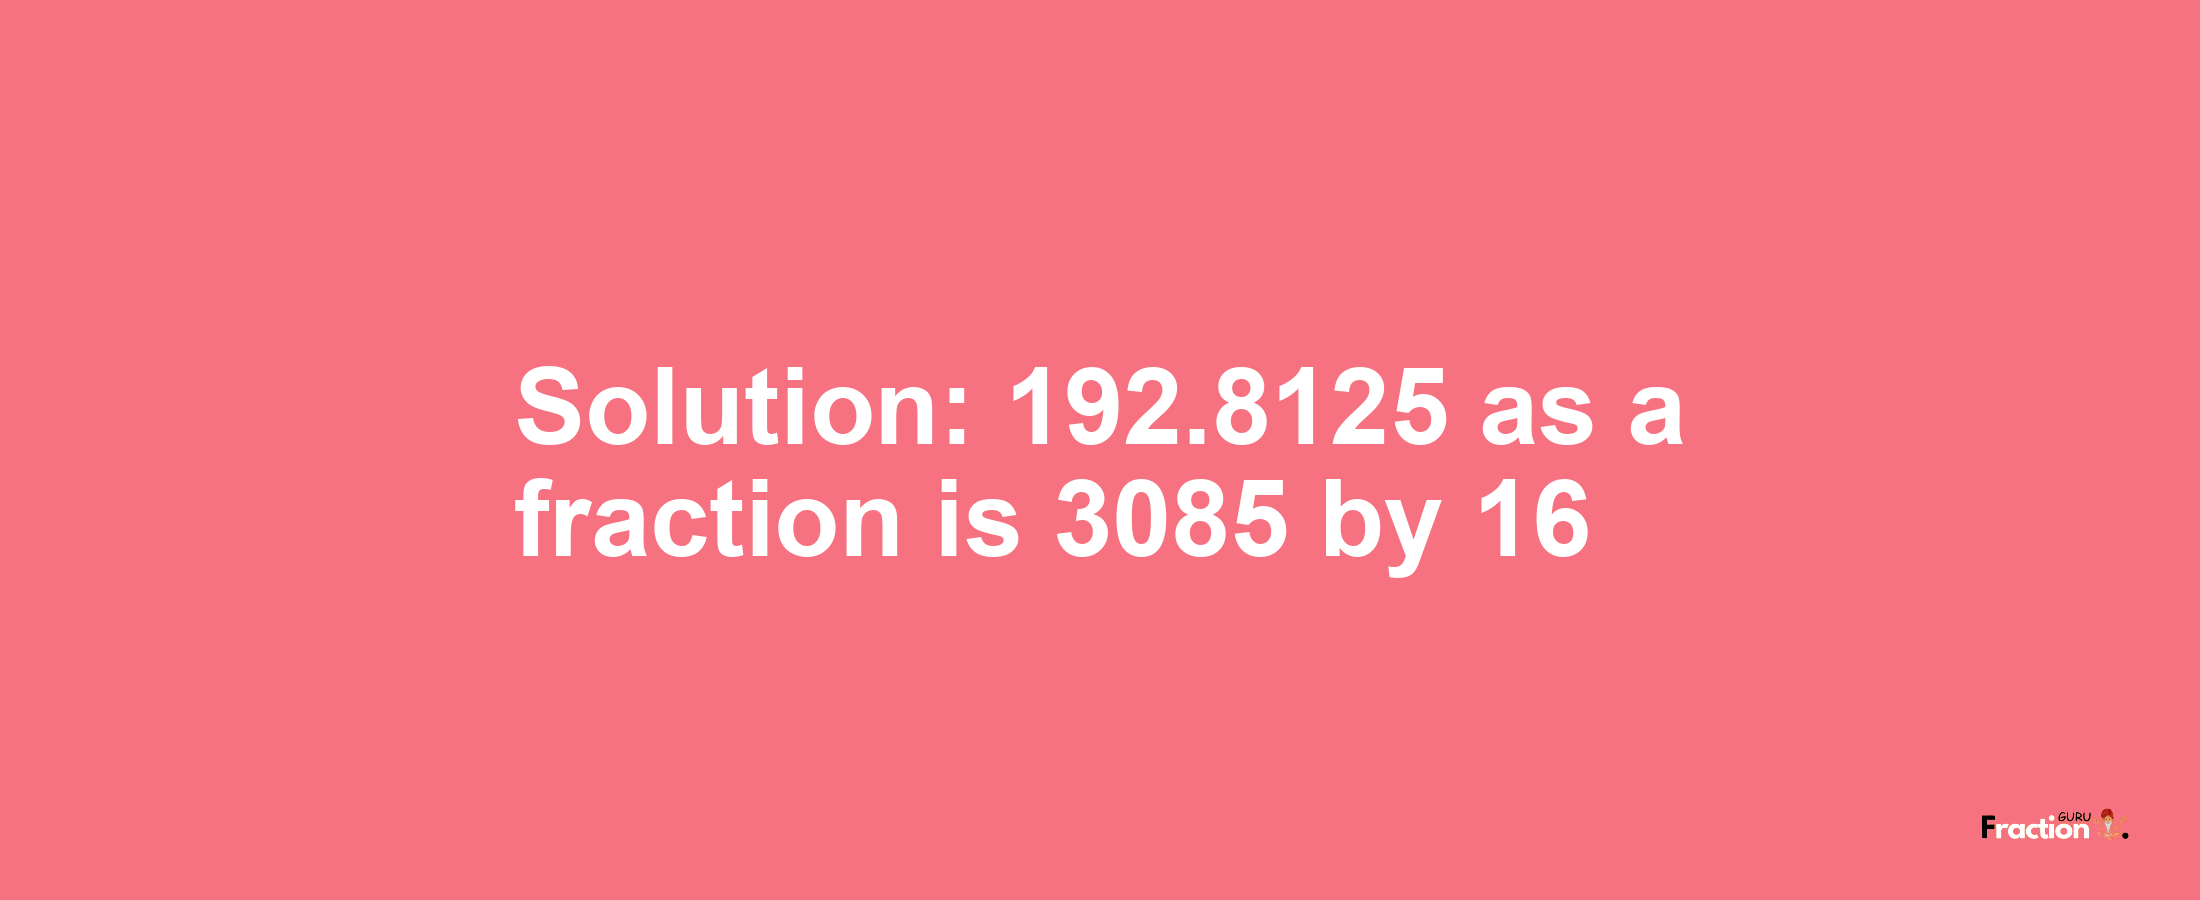 Solution:192.8125 as a fraction is 3085/16